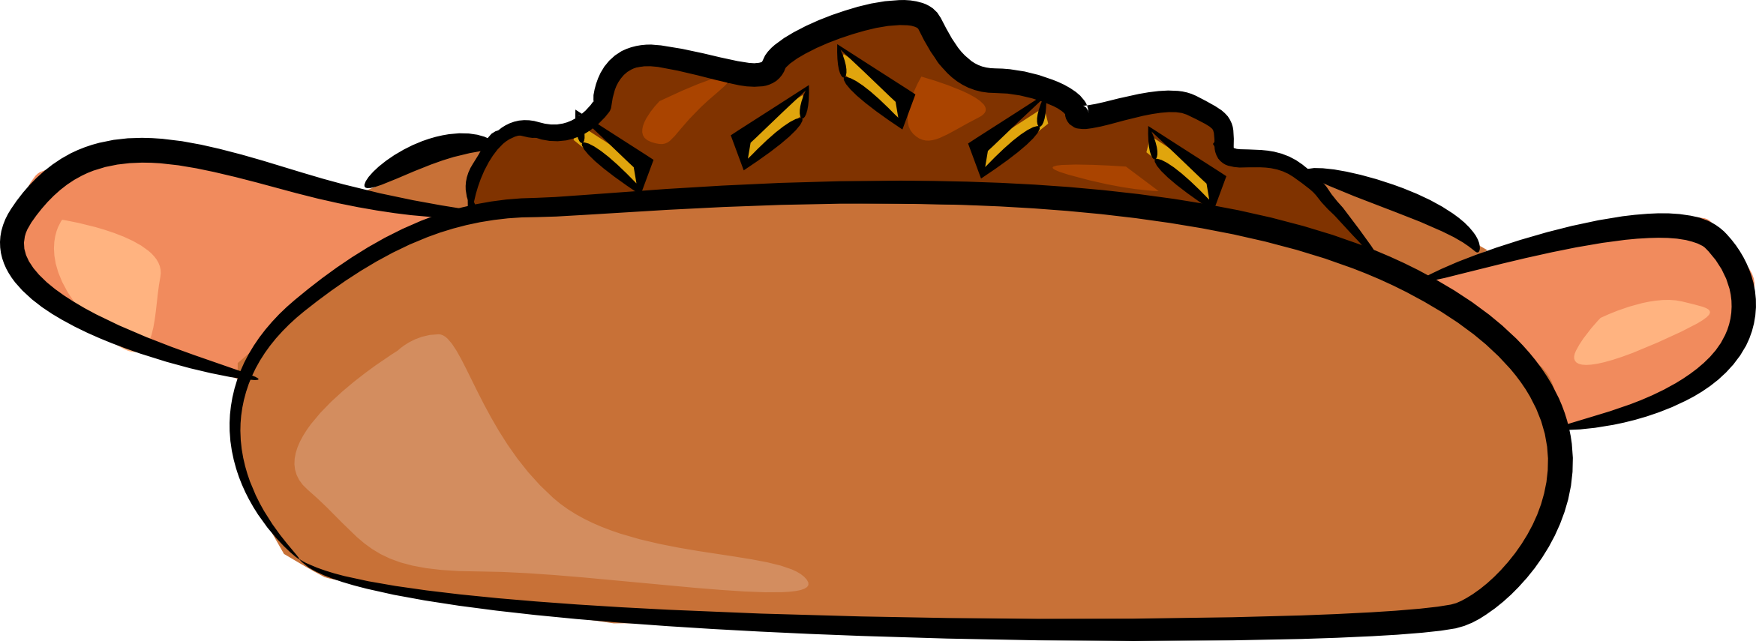 The Totally Free Clip Art Blog  Food   Chili Dog